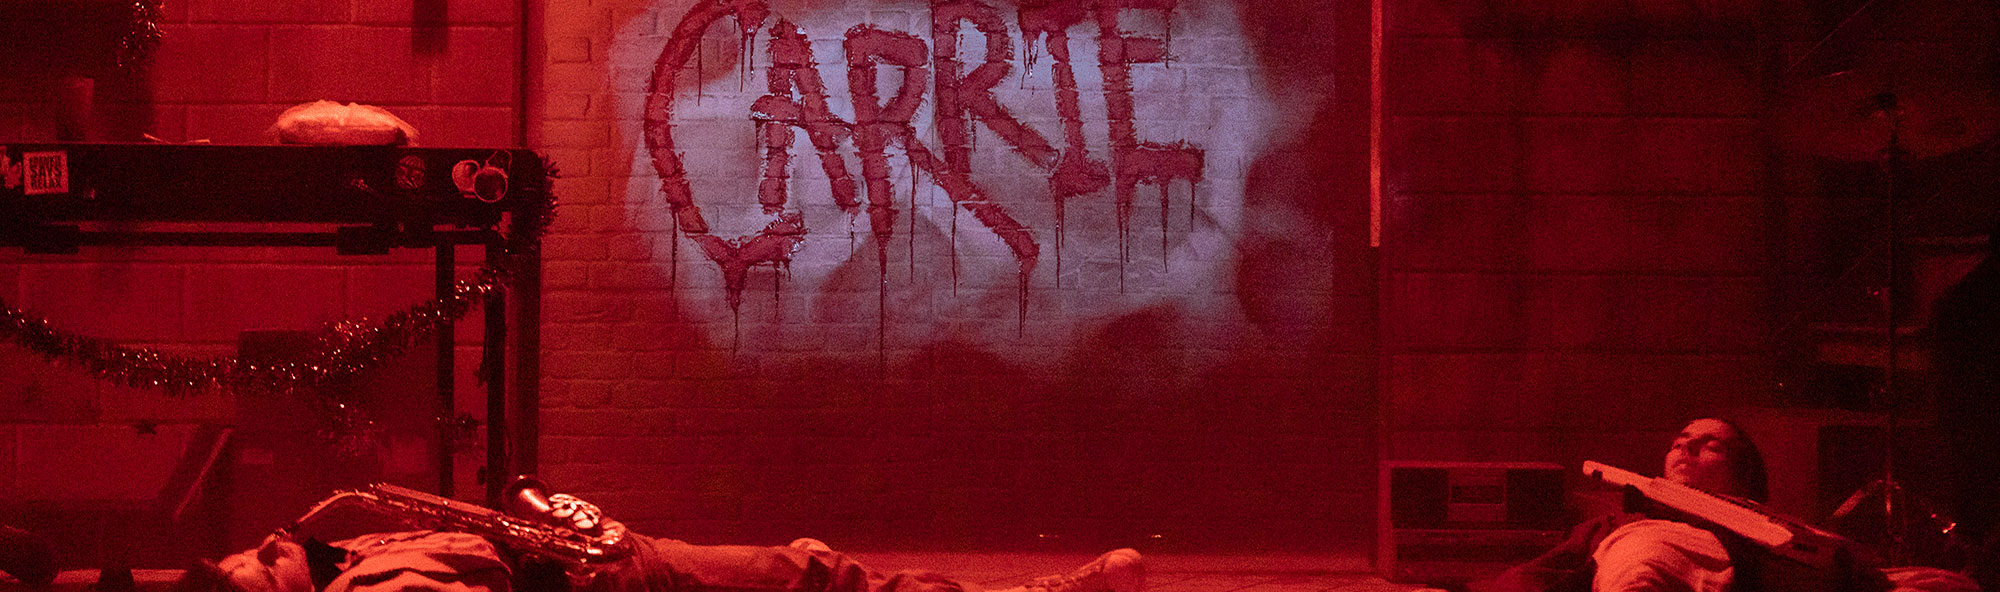 Mountainview Academy - Carrie: The Musical - (C) Mountainview Academy